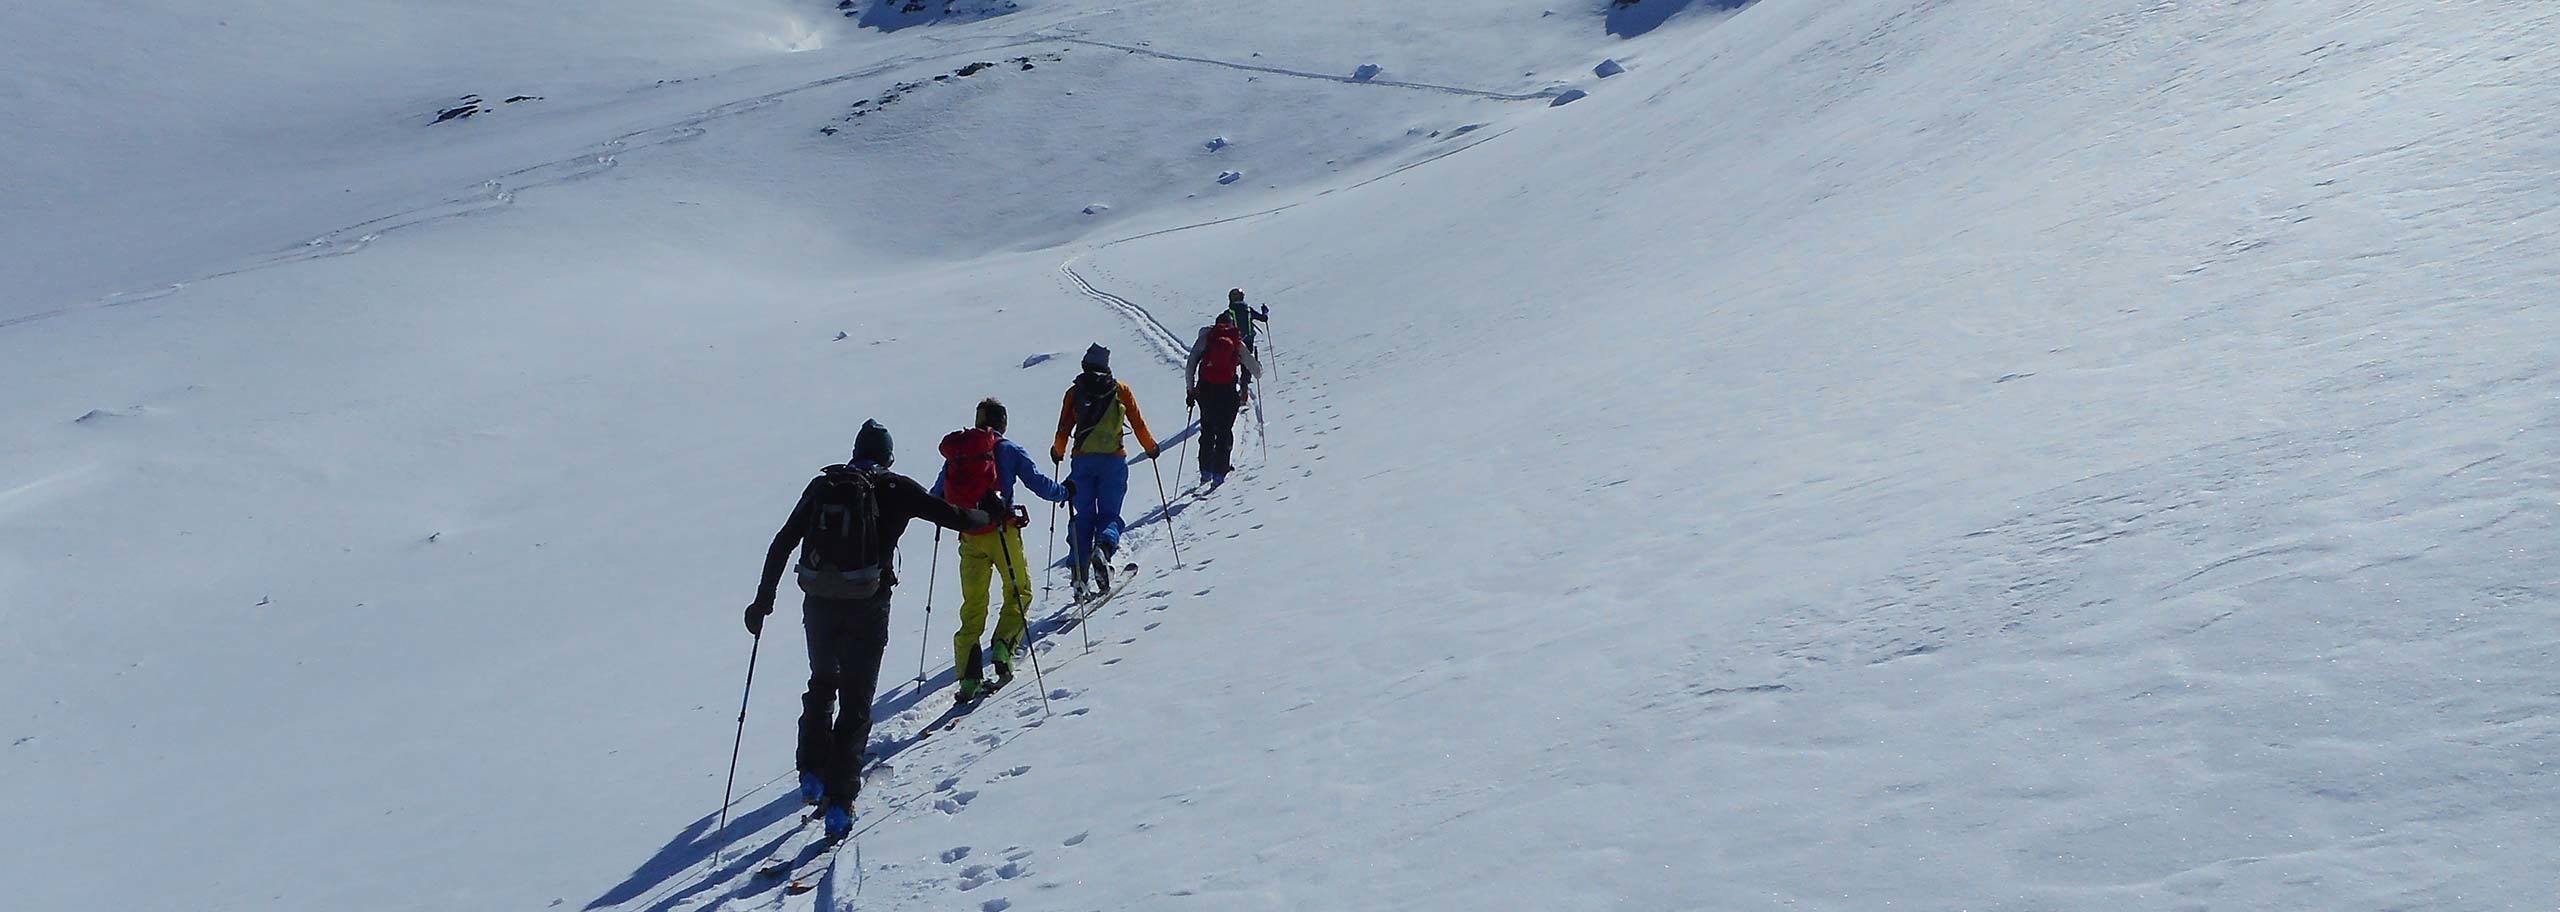 Ski Mountaineering in Val di Sole, Ski Touring with a Mountain Guide